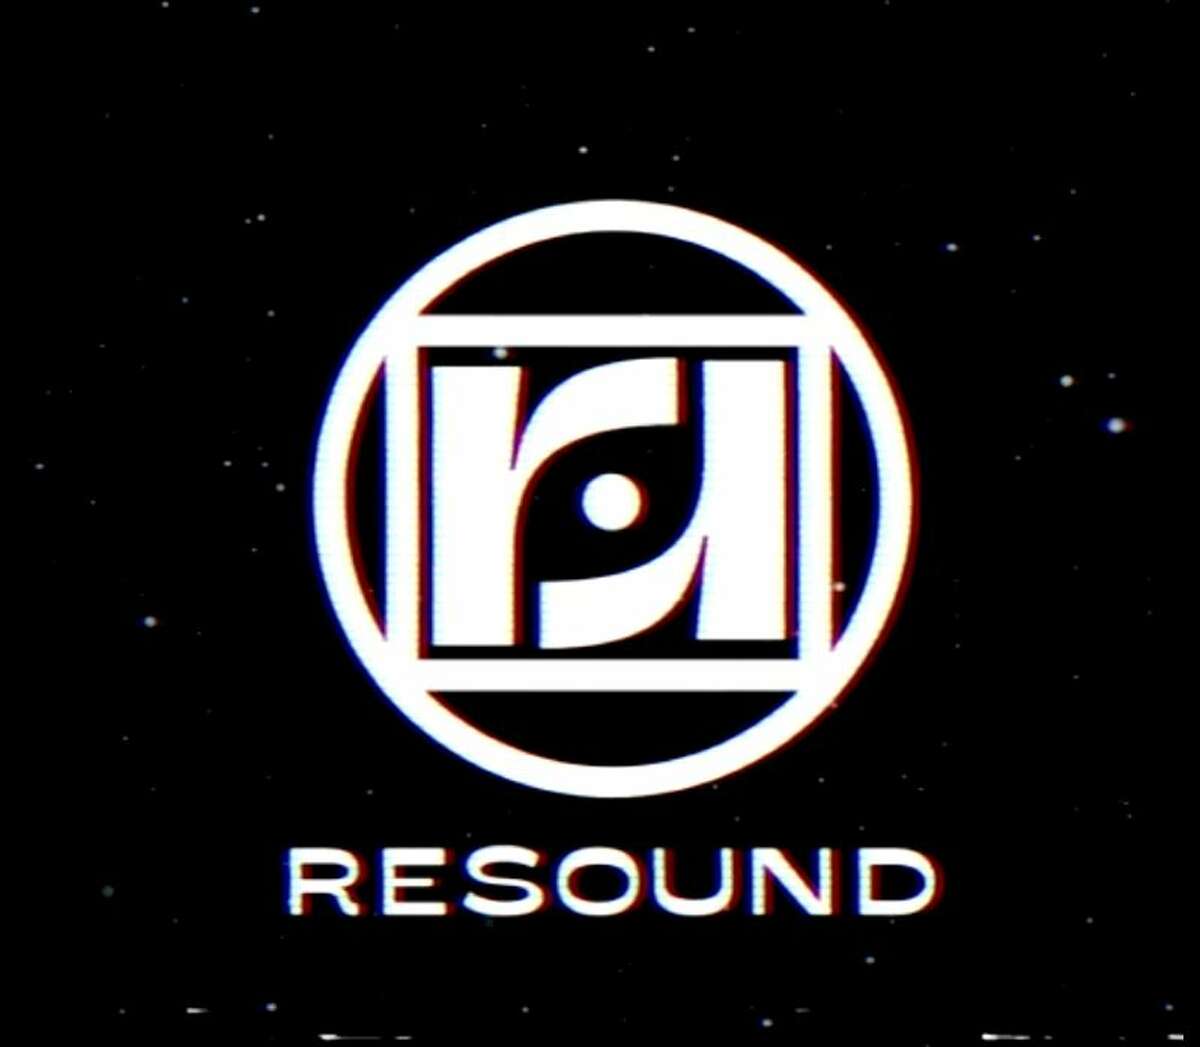 New company Resound announced its launch Monday, releasing a jam-packed schedule for the beloved Paper Tiger. The local music venue lost its national booking and promotion company, Margin Walker Presents, last year due to the coronaviurs pandemic canceling shows.